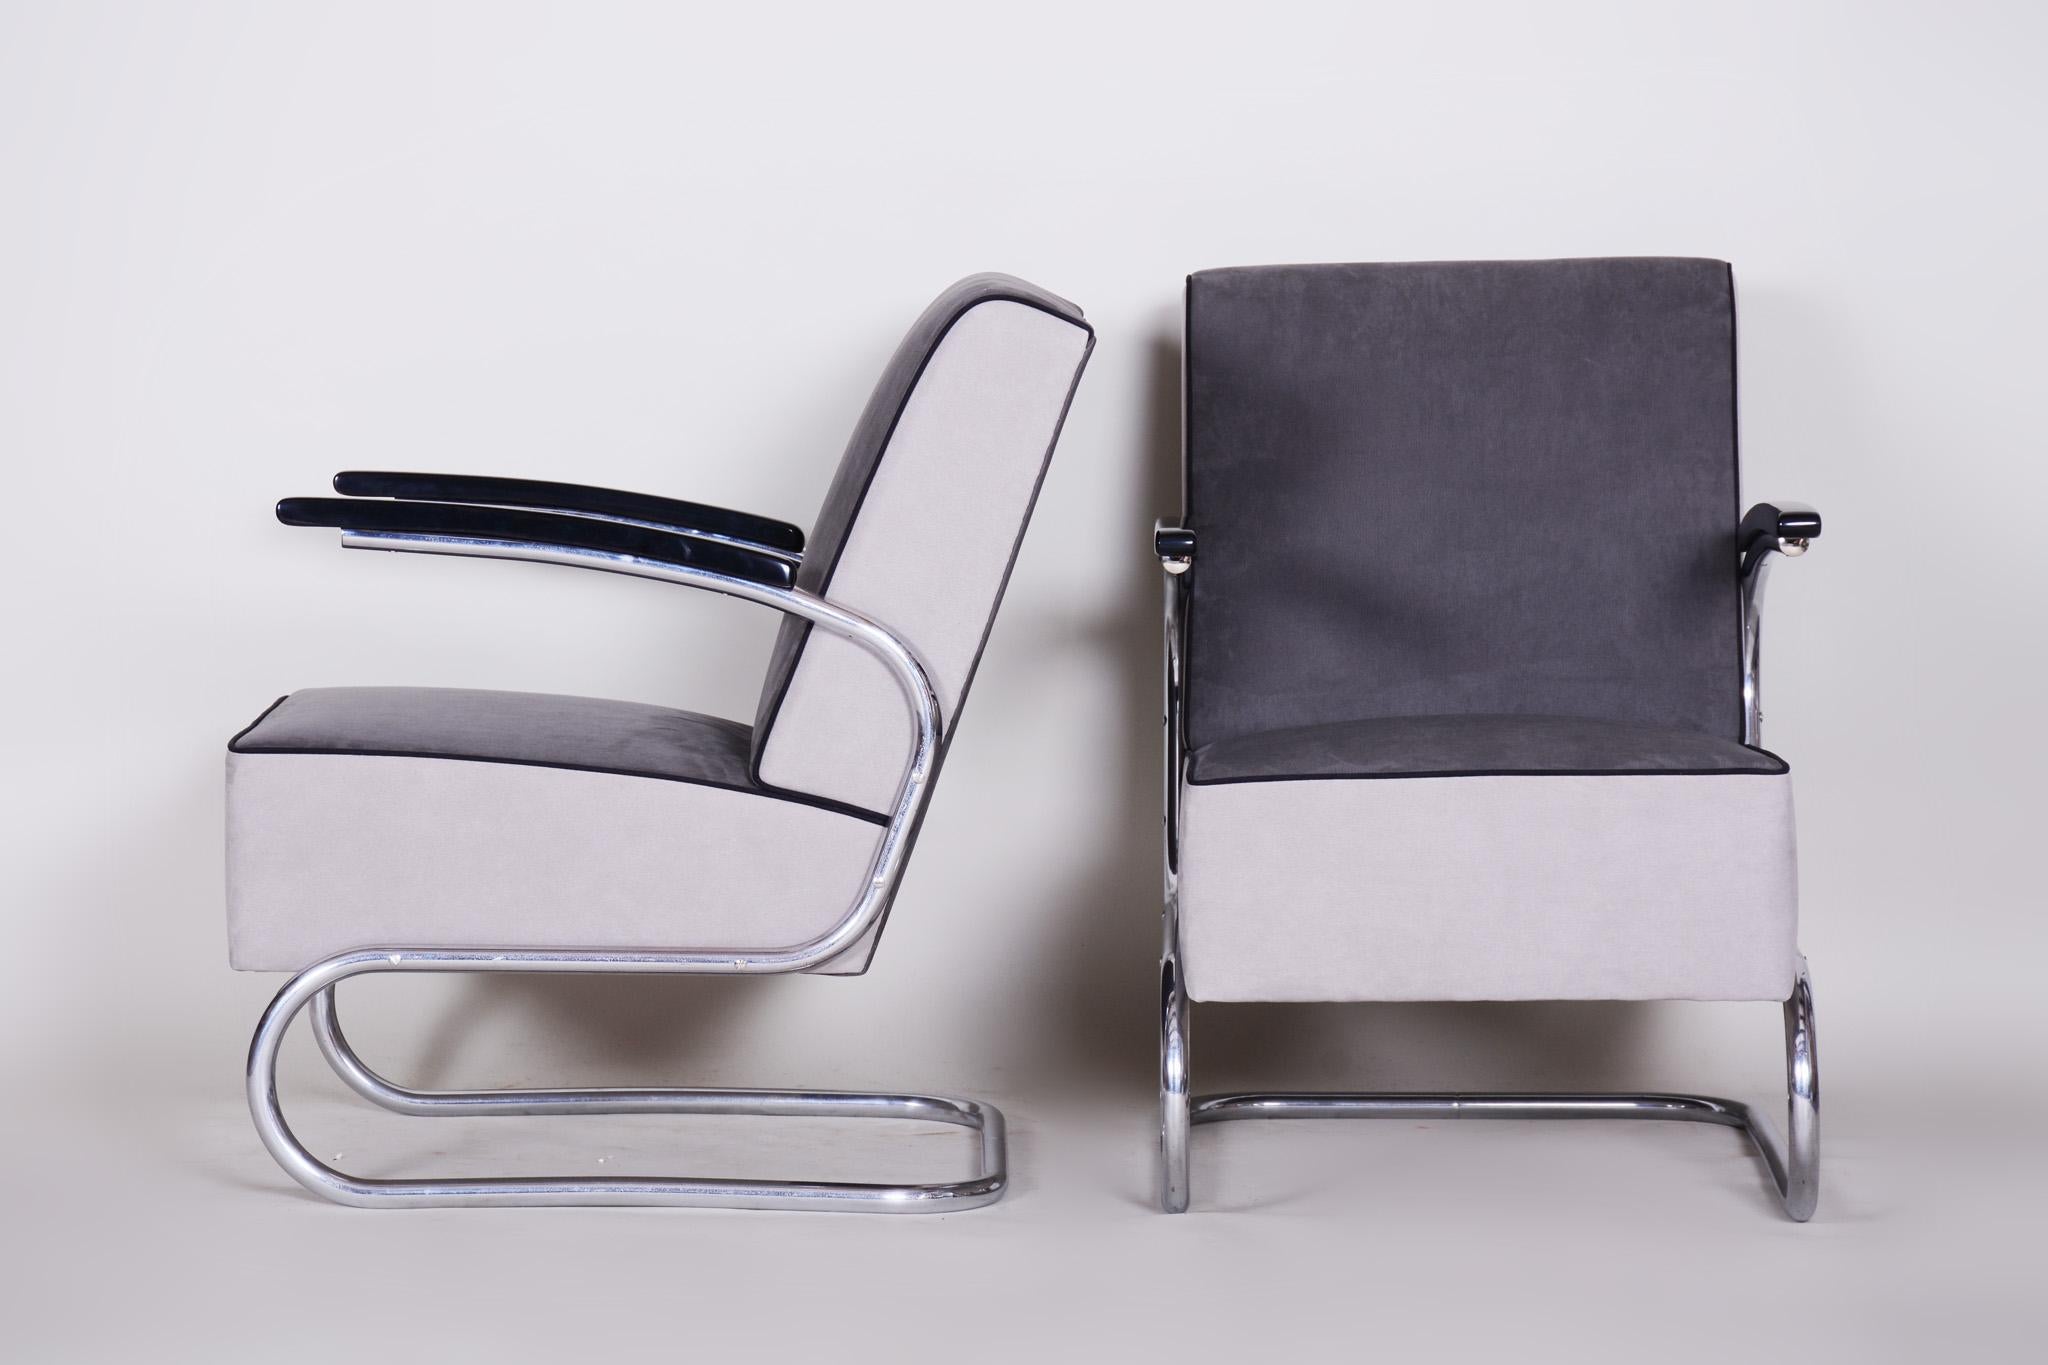 Czech Pair of Tubular Steel Cantilever Armchairs in Art Deco, Chrome, New Upholstery For Sale